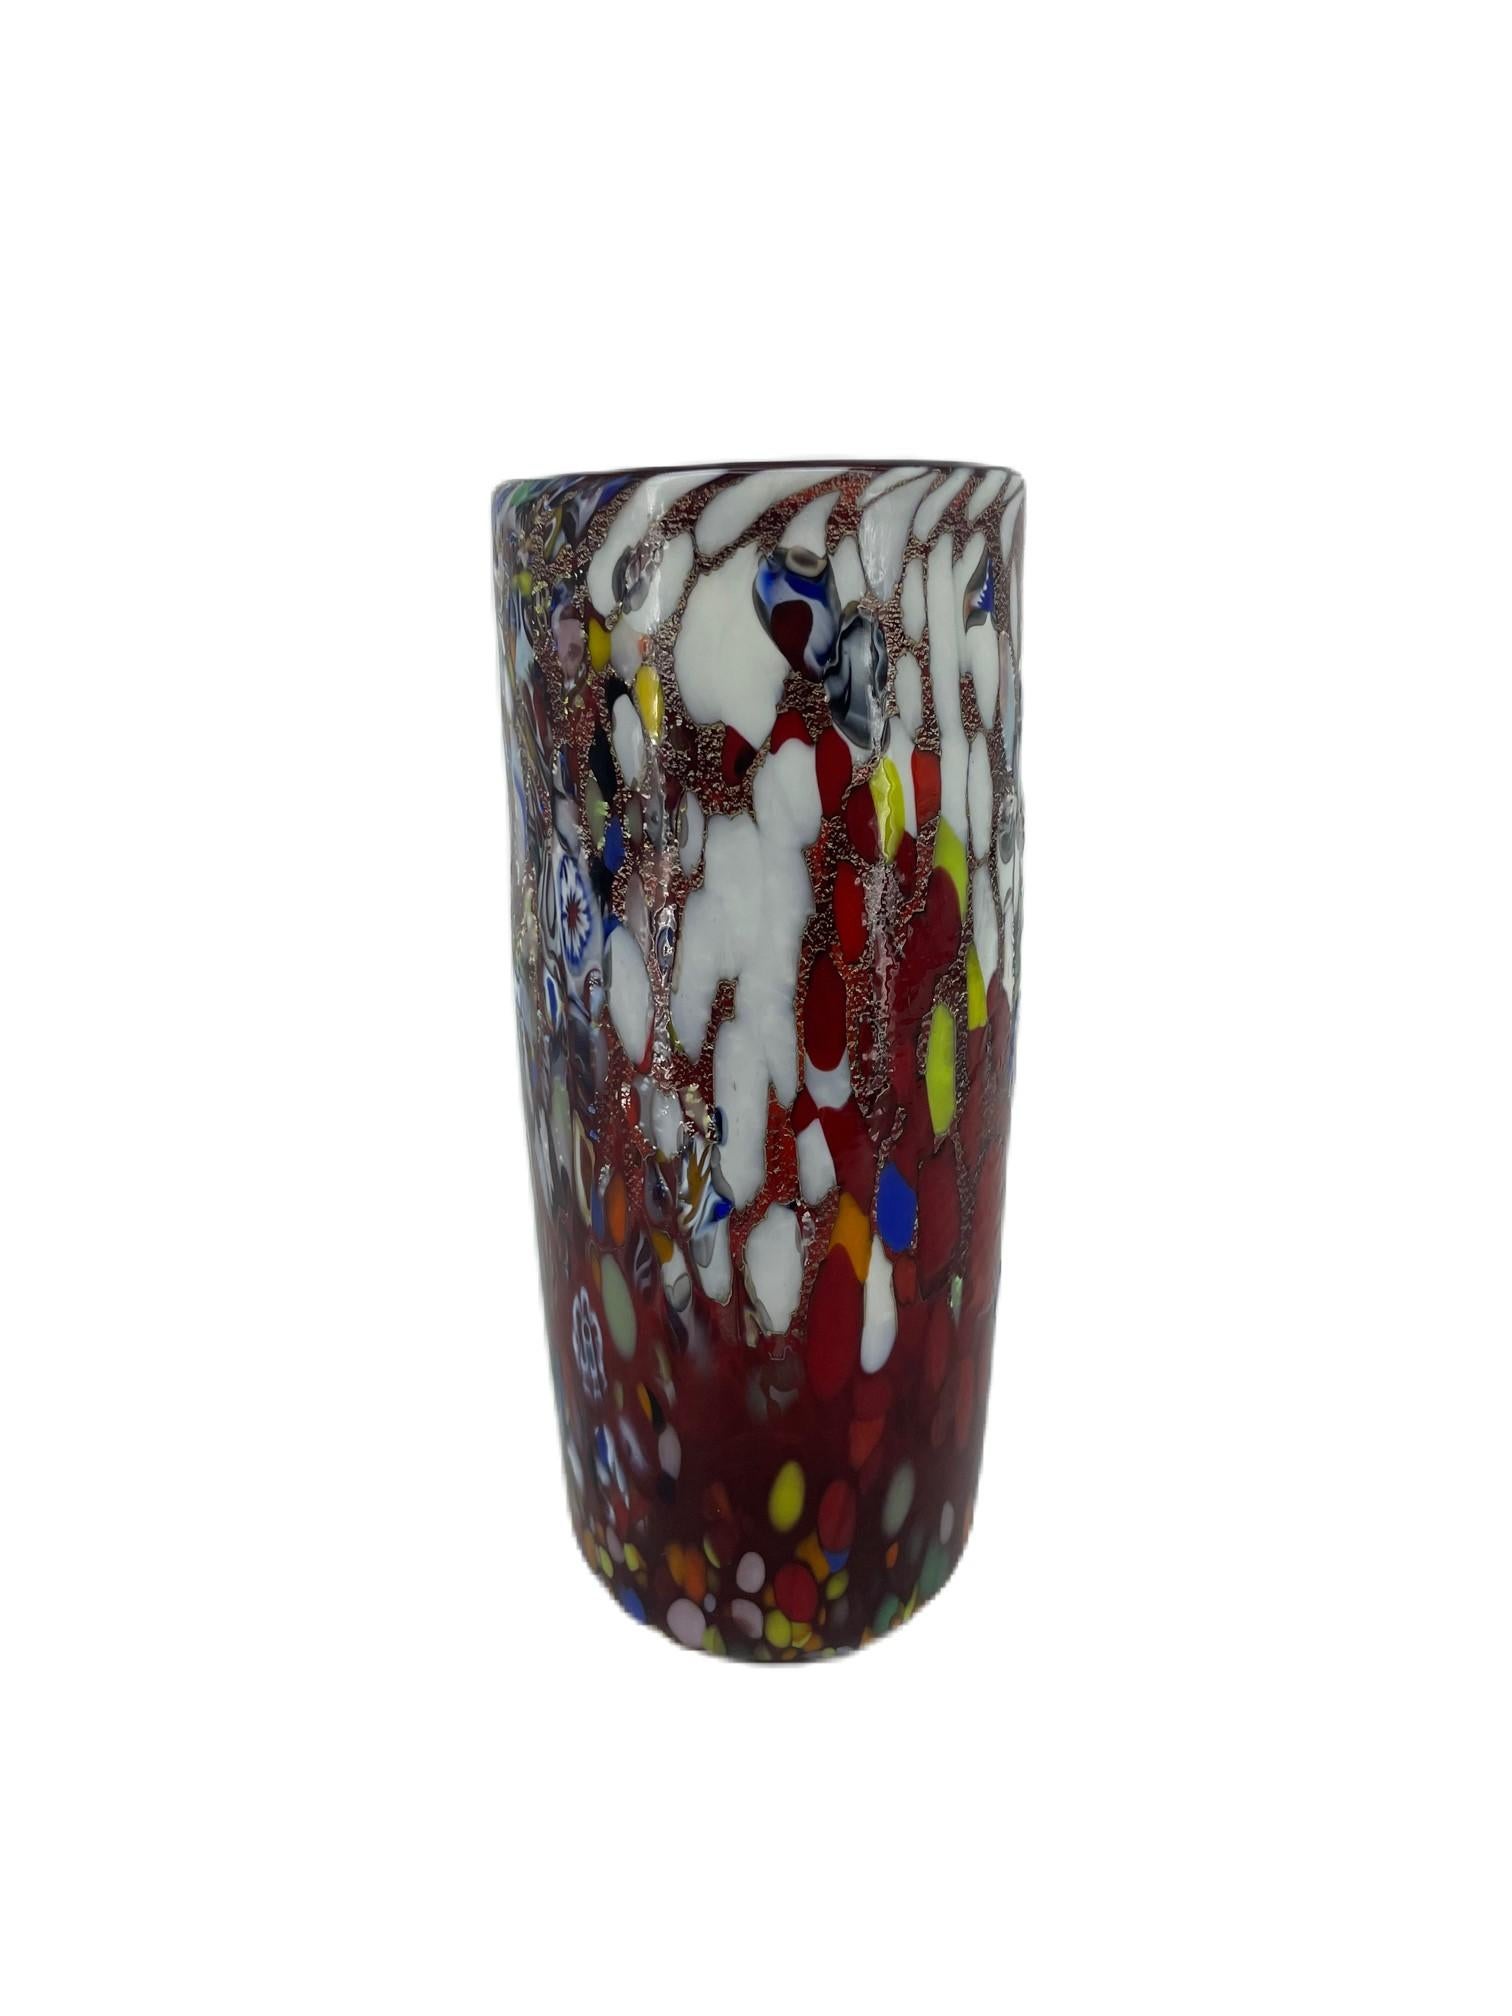 Vase from the ‘Fantasy’ collection in red blown Murano glass with assorted decoration of multicolour glass ‘Mace”, Murrina Millefiori and silver leaf.
The vase has been hand-crafted by Murano master glassmaker Imperio Rossi.
Original Murano Vetro